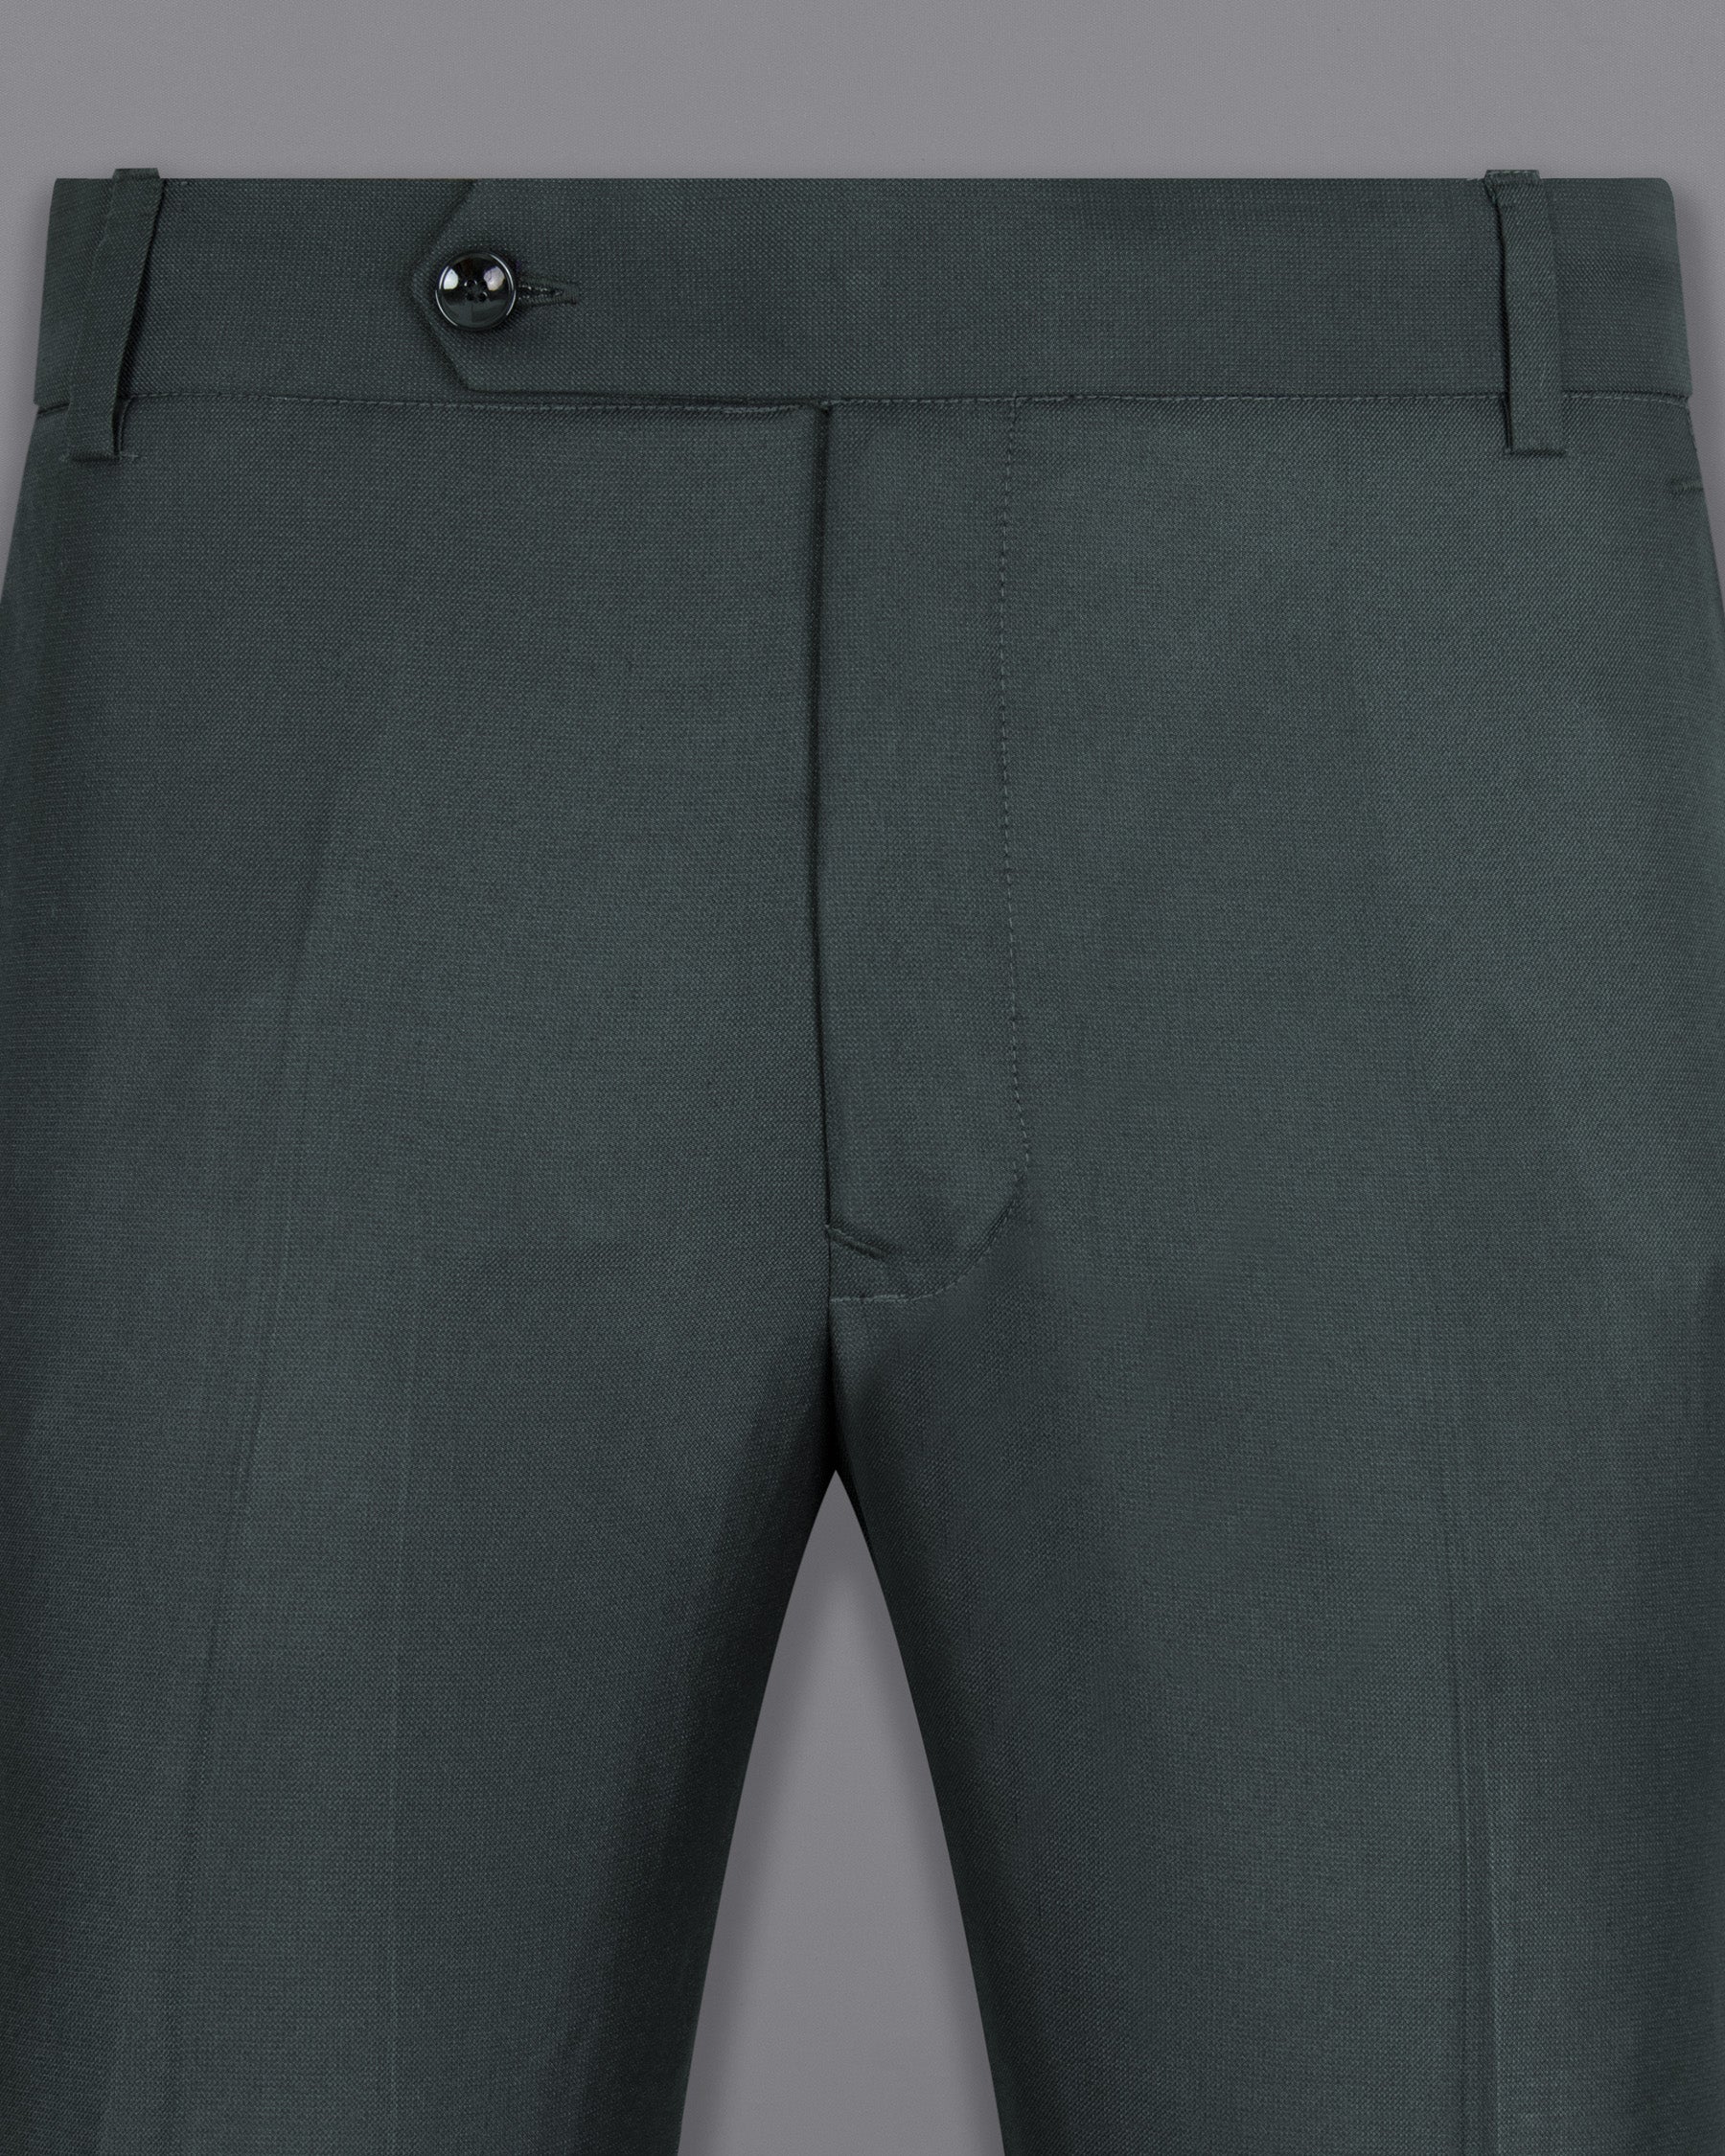 Pale Sky Grey houndstooth Wool Rich  Pant T1311-34, T1311-28, T1311-30, T1311-36, T1311-32, T1311-38, T1311-40, T1311-42, T1311-44